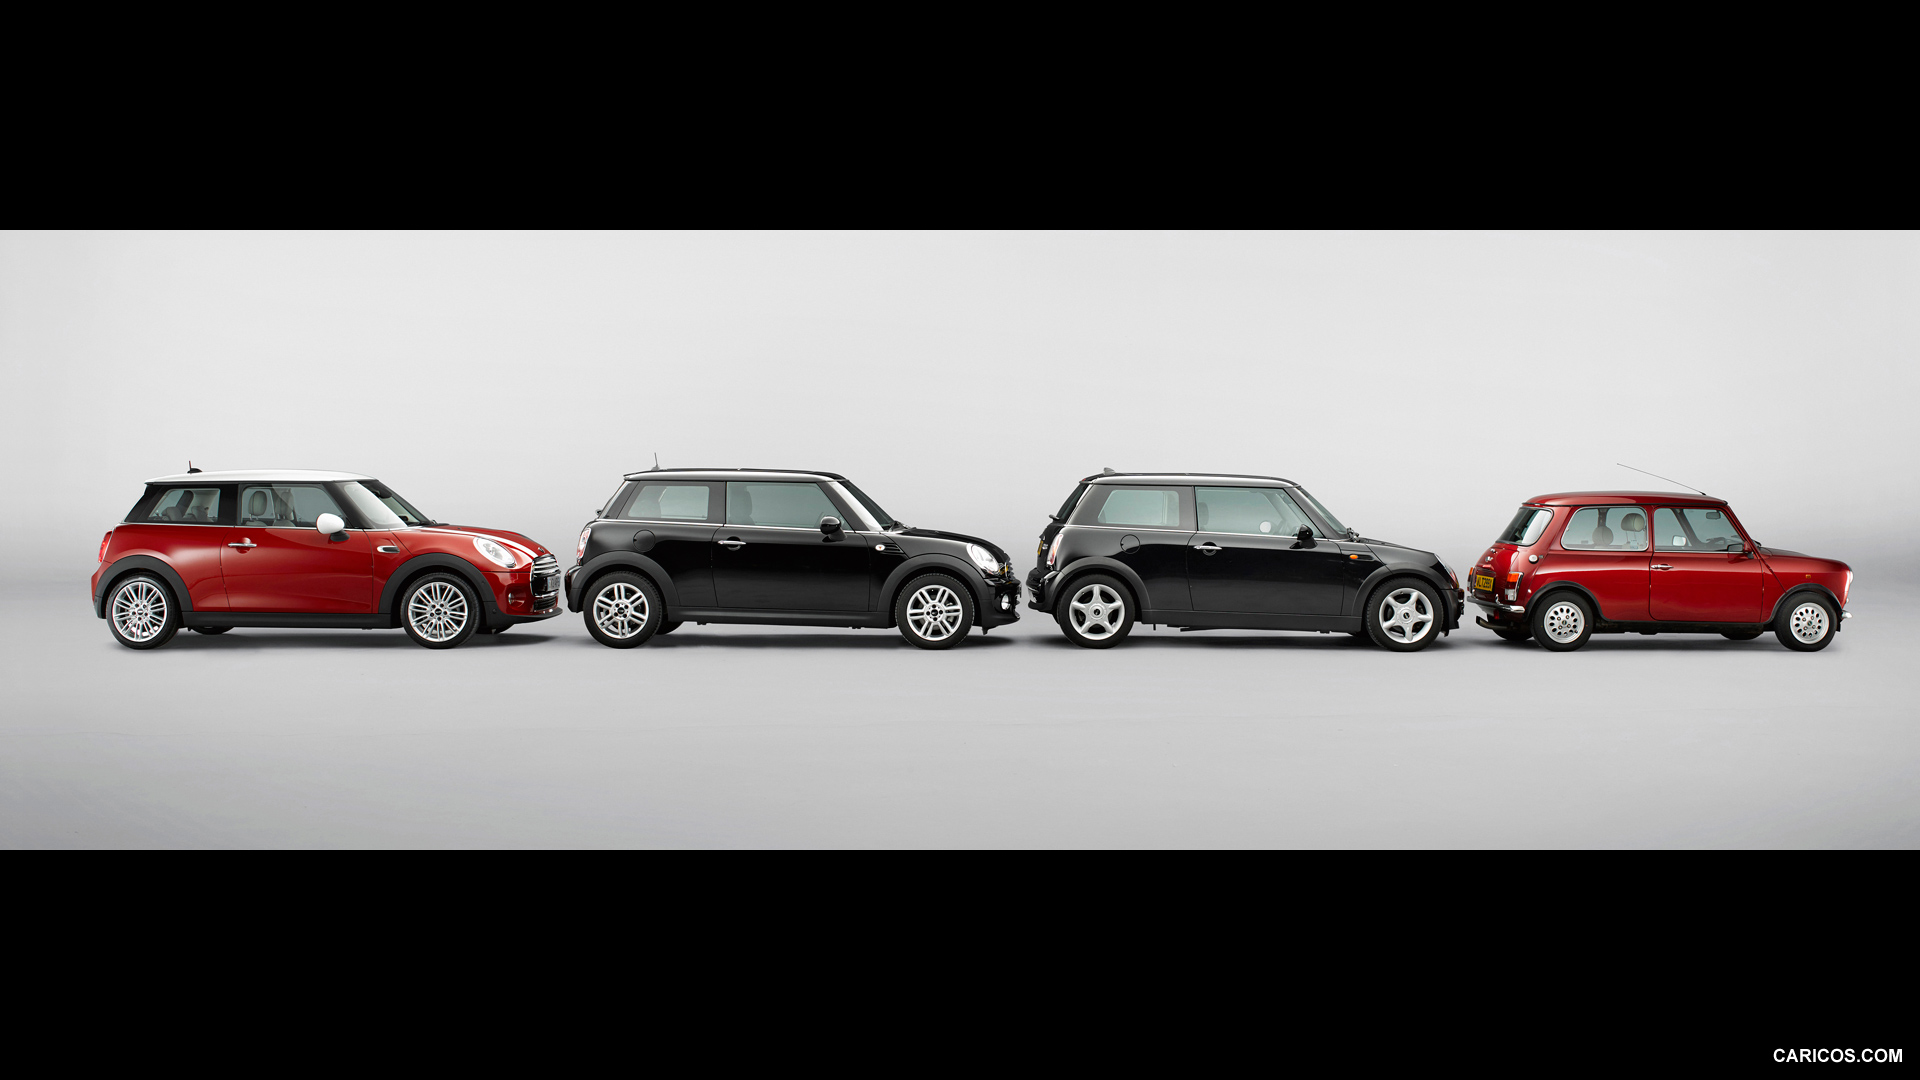 2015 MINI Cooper - Four Generations - Side, #125 of 280